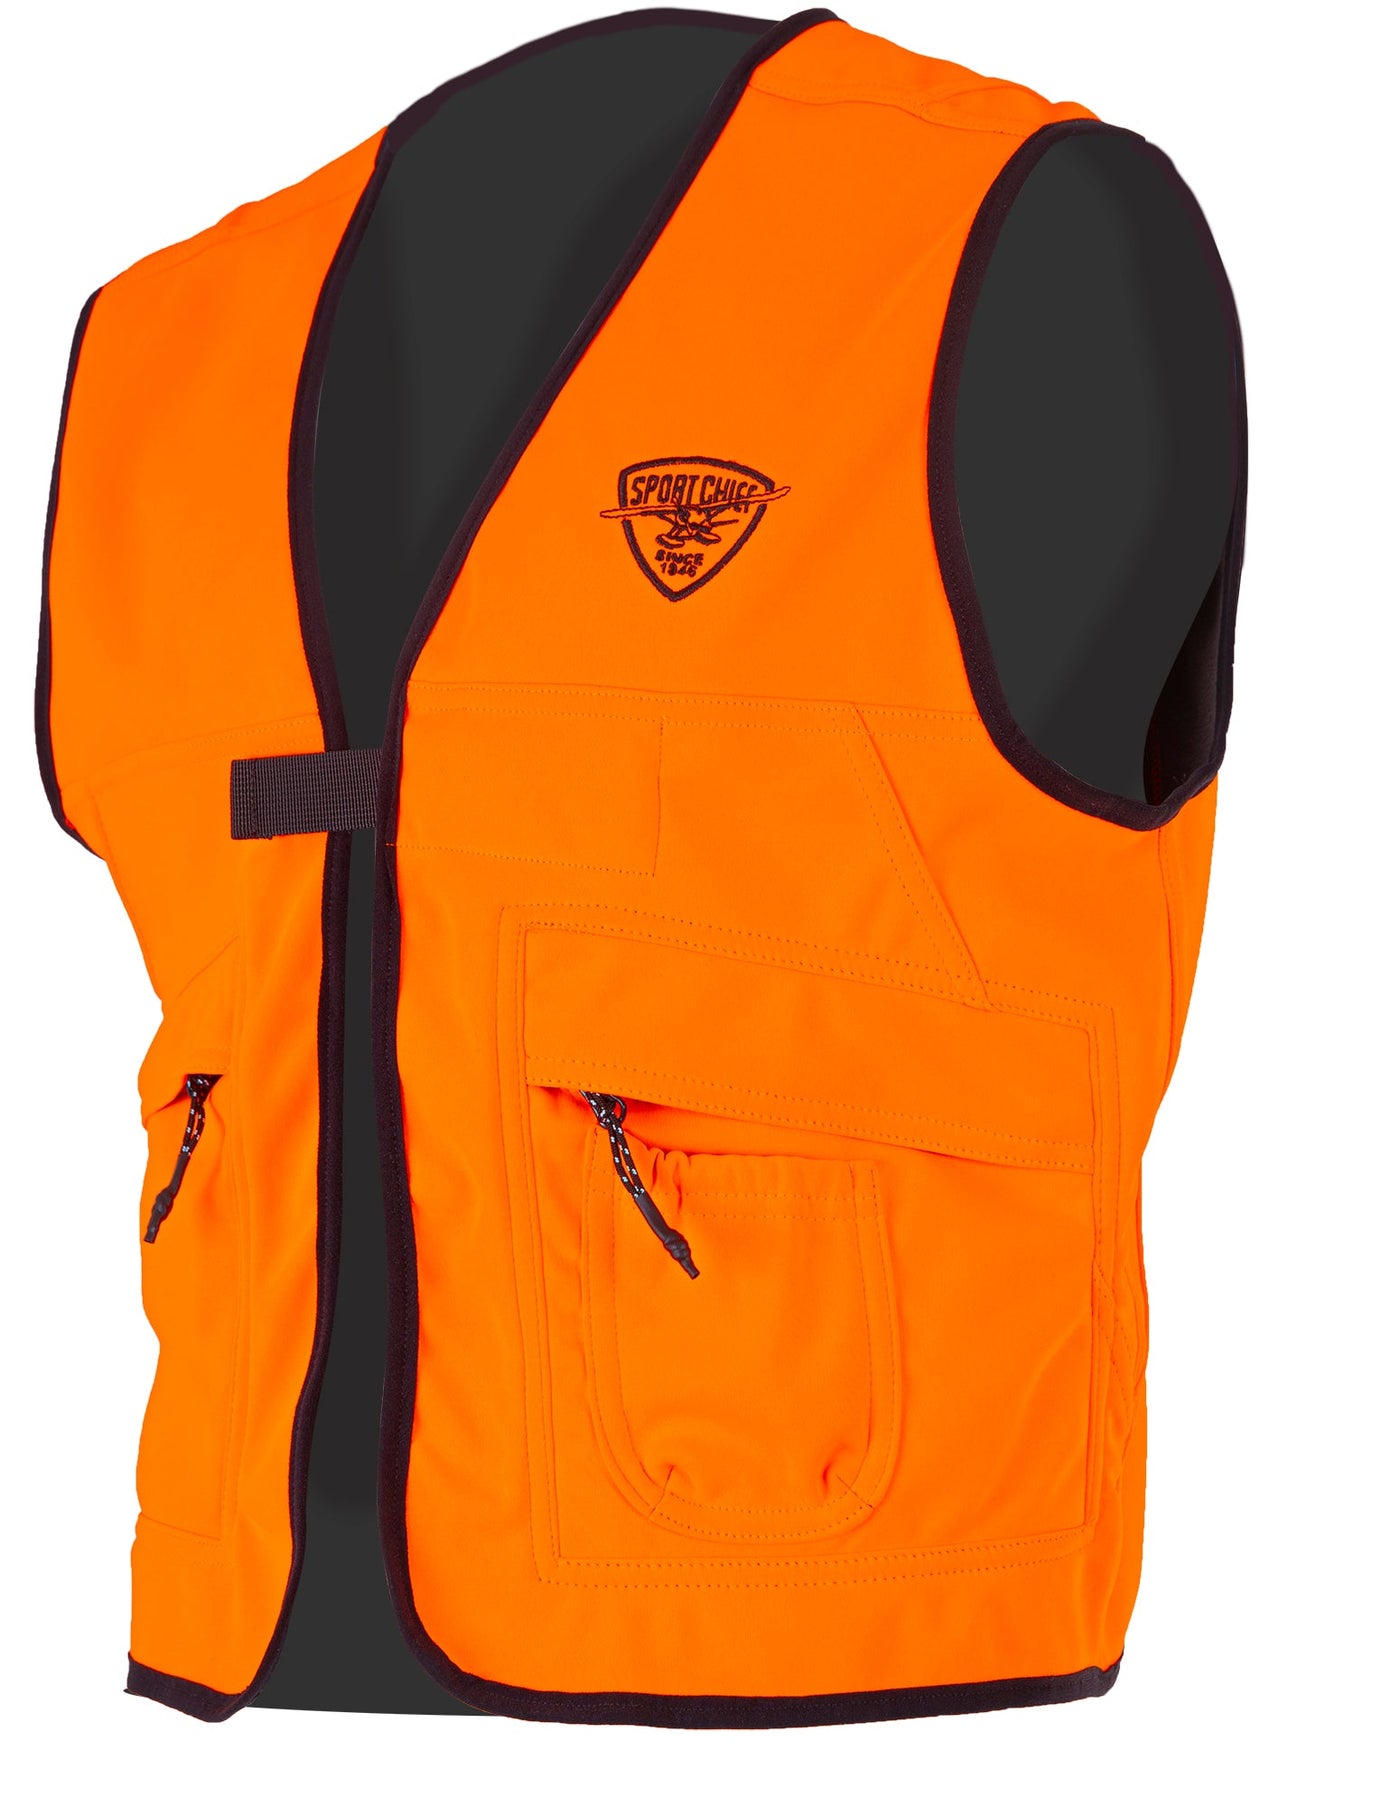 Hunting safety vest Jason T. Morneau "The Hunting Beast" collection 